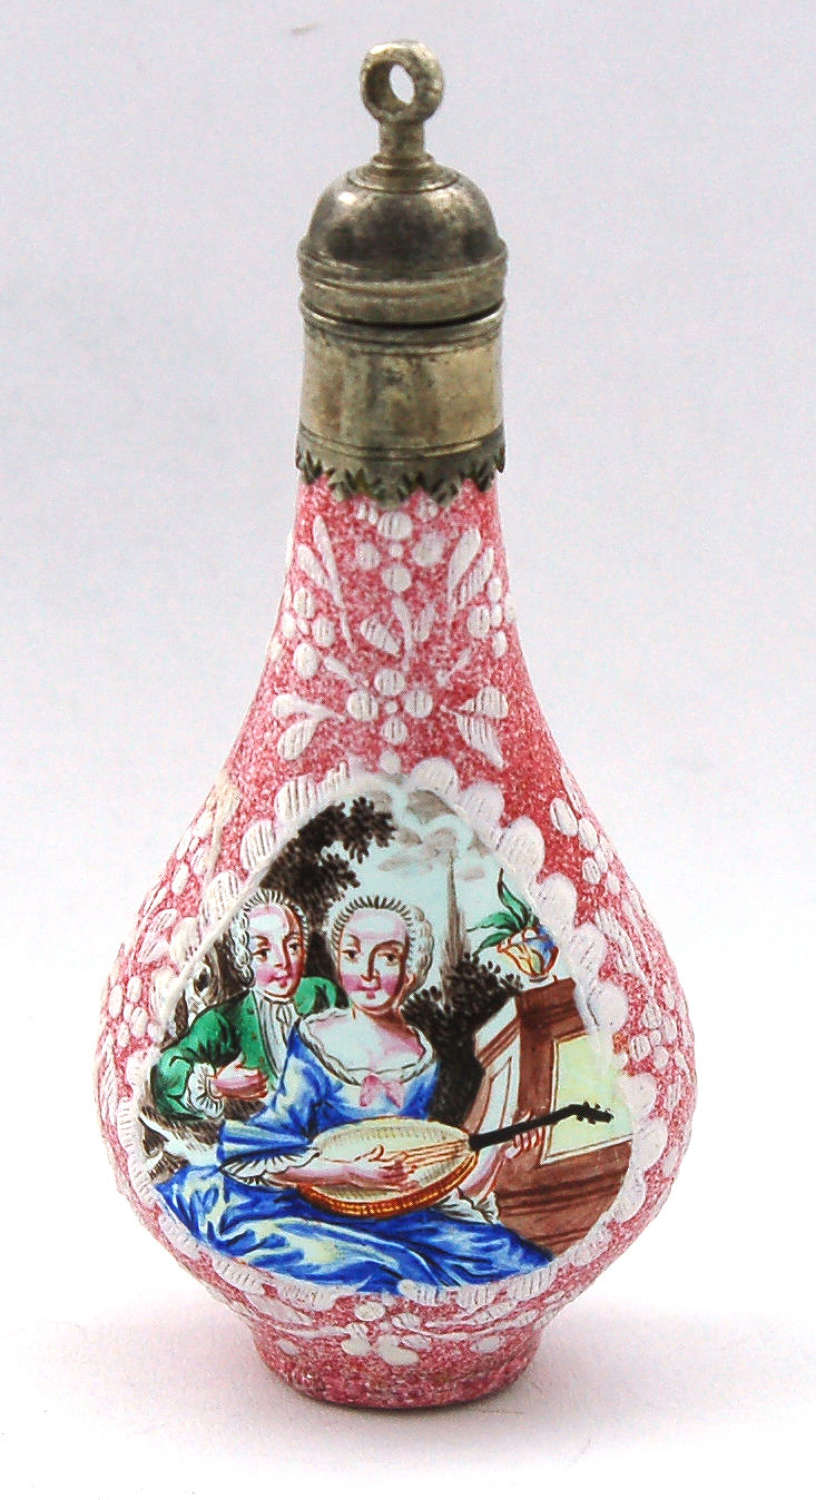 Enamel scent with seated couple C1730